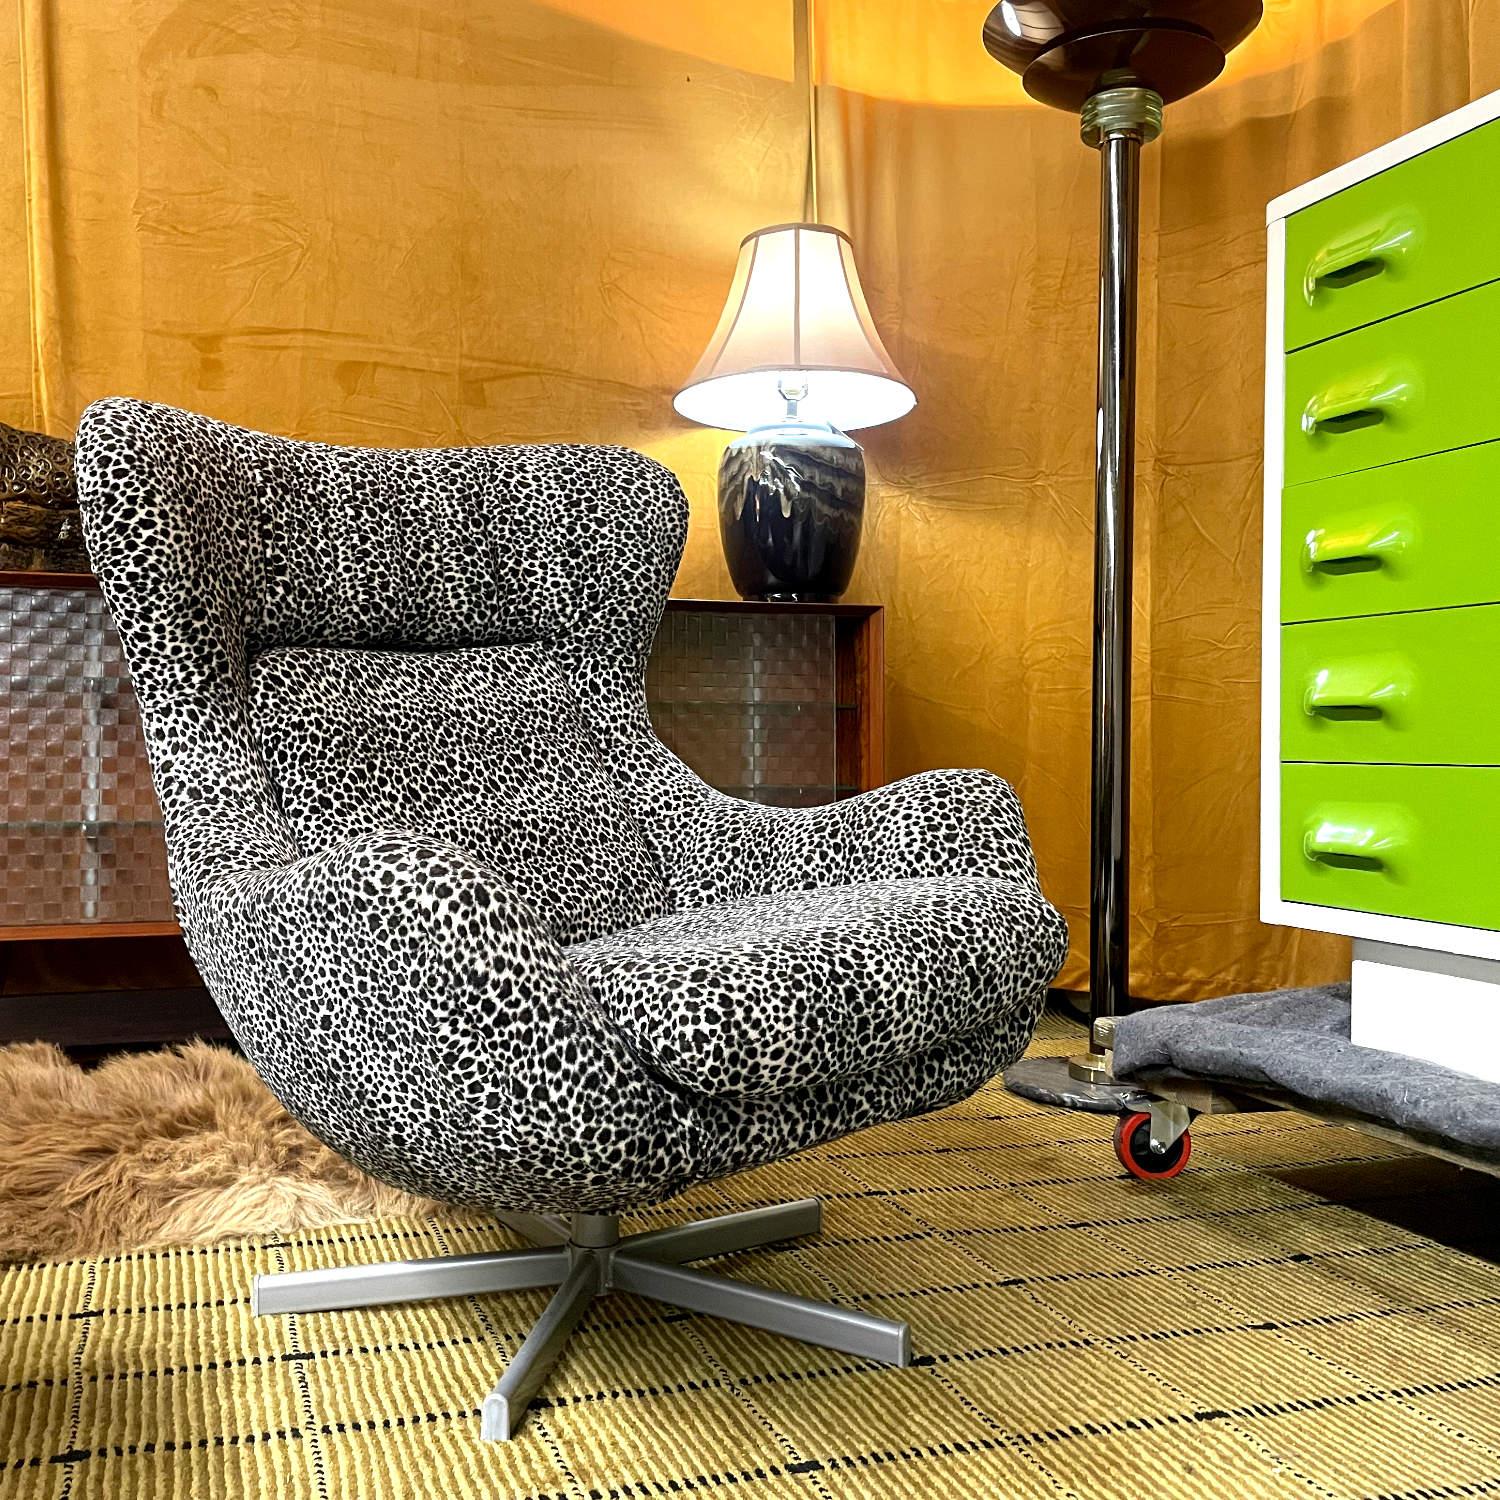 Pair of Vintage Fuzzy Leopard Arne Jacobsen Egg Chair Style Swivel Chairs For Sale 4